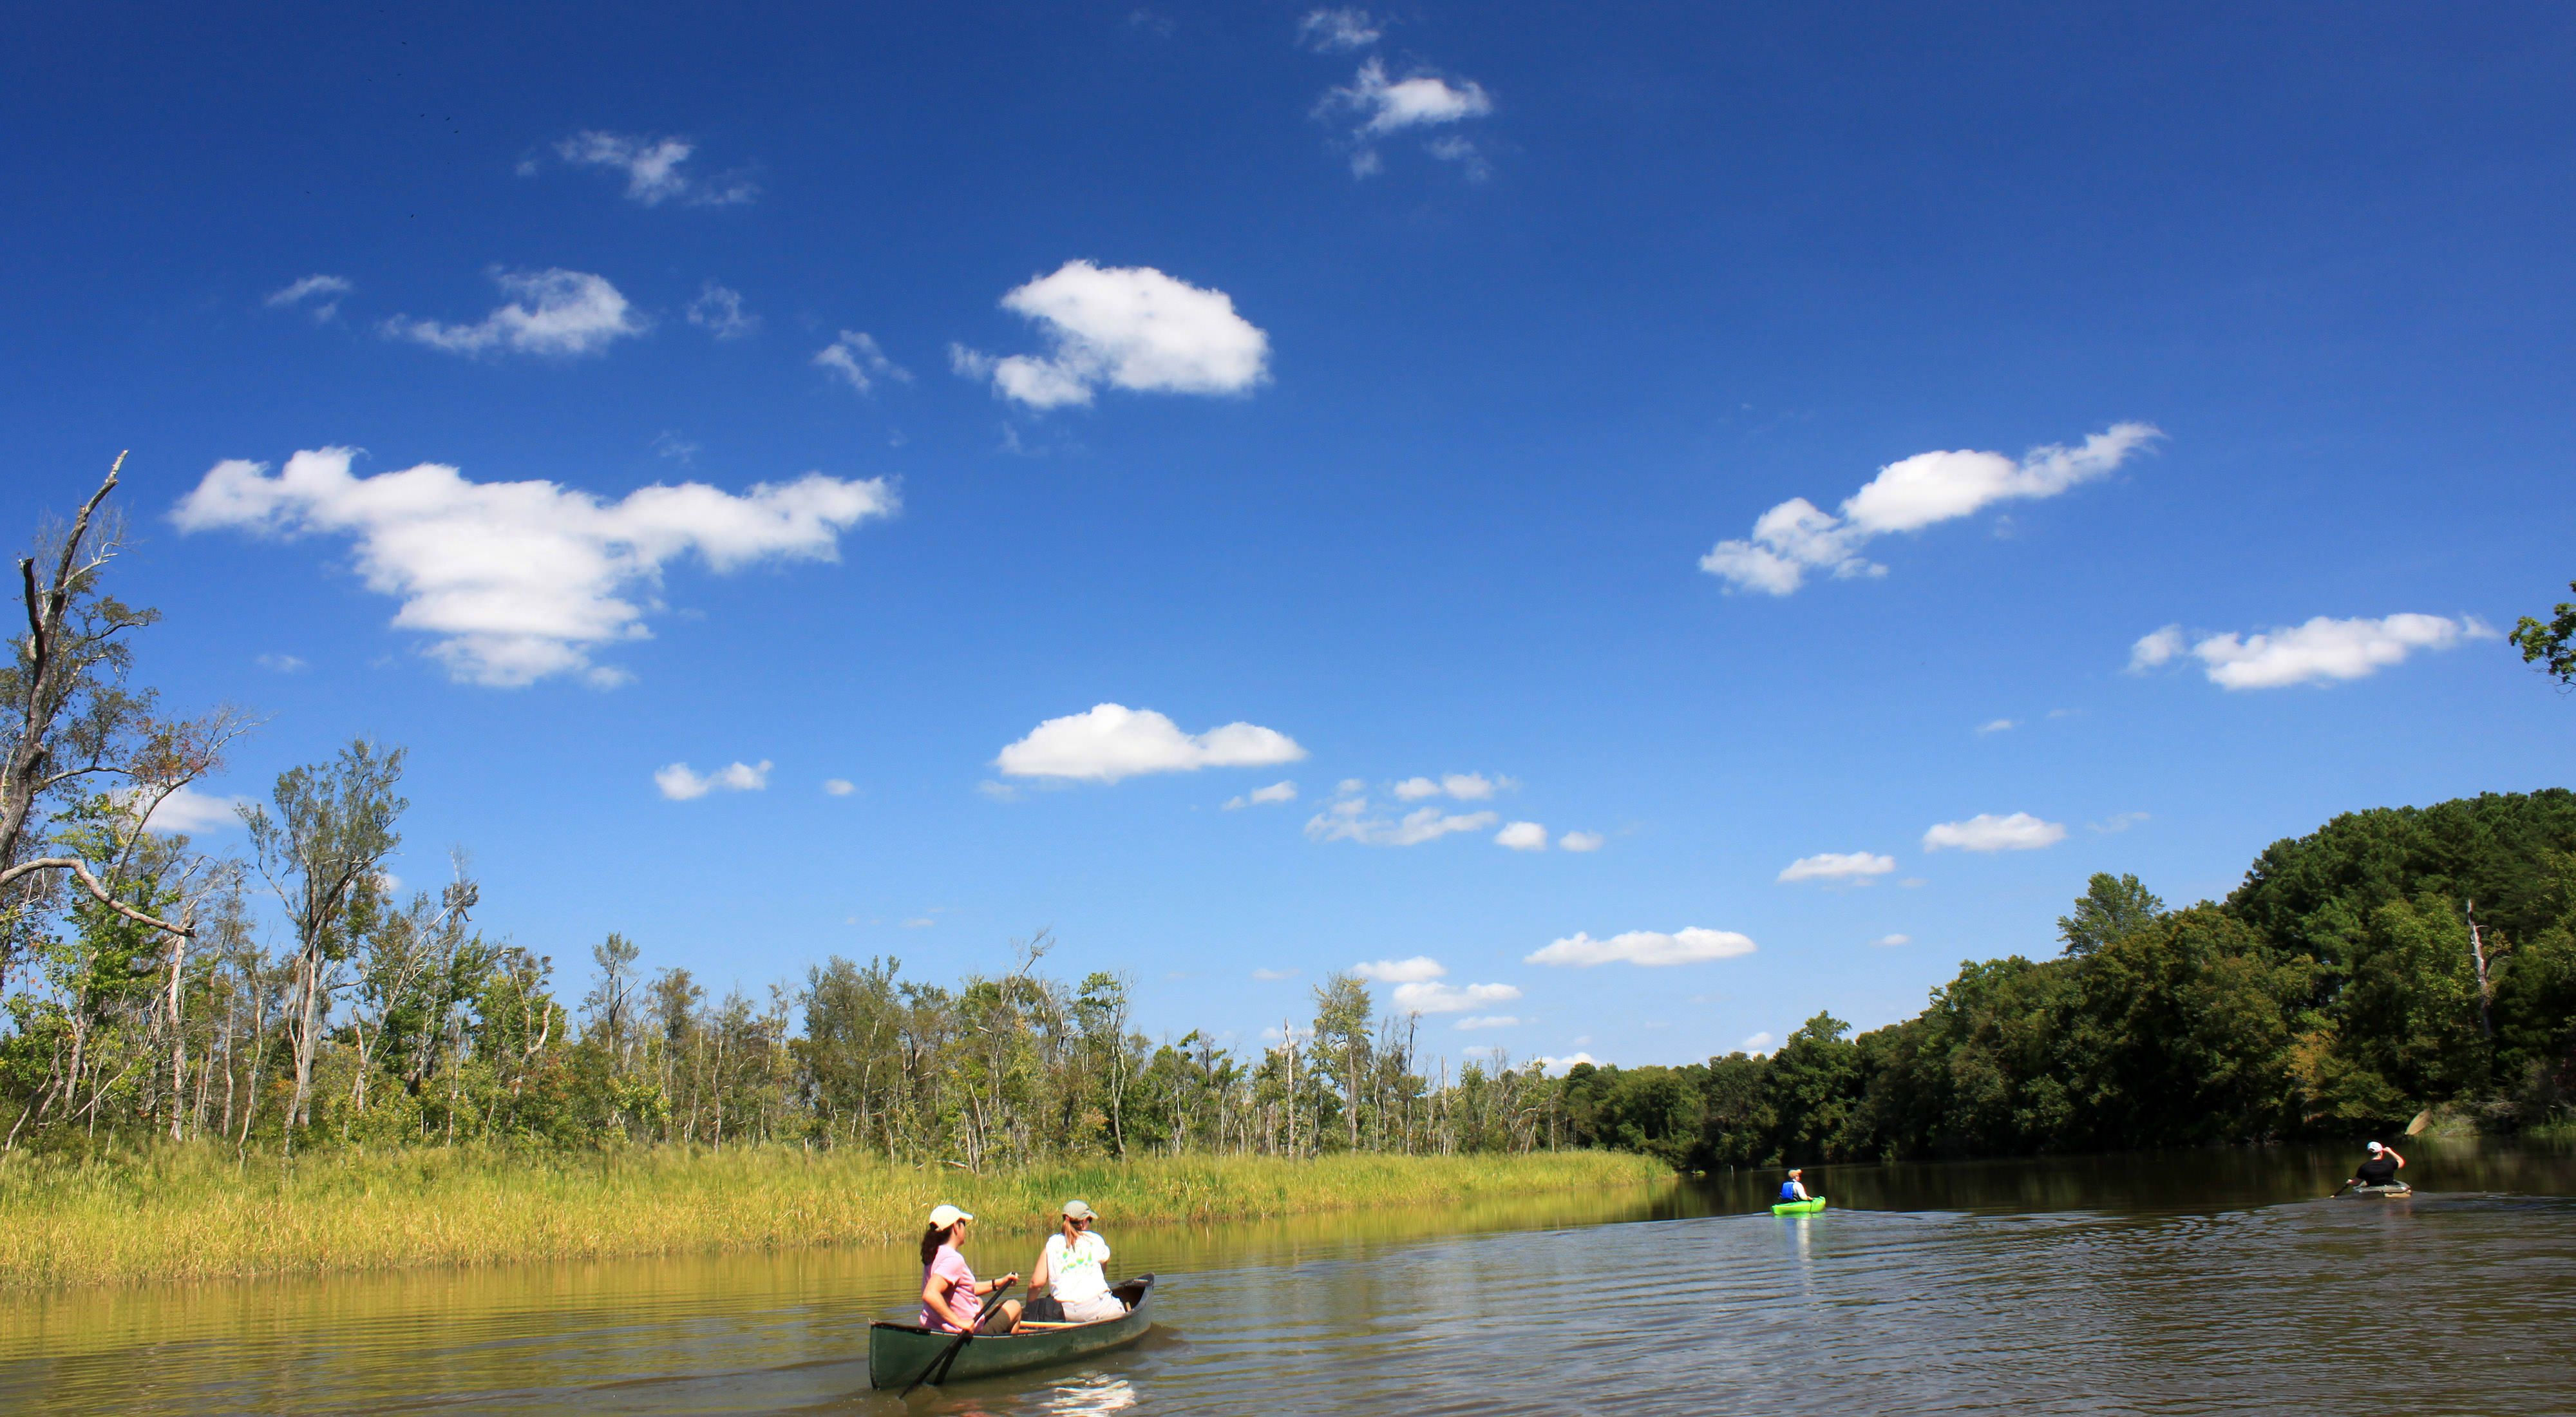 Two women in a canoe paddle through open water at the edge of a marsh. Two kayakers float ahead of them. The bright blue sky is filled with high puffy white clouds.